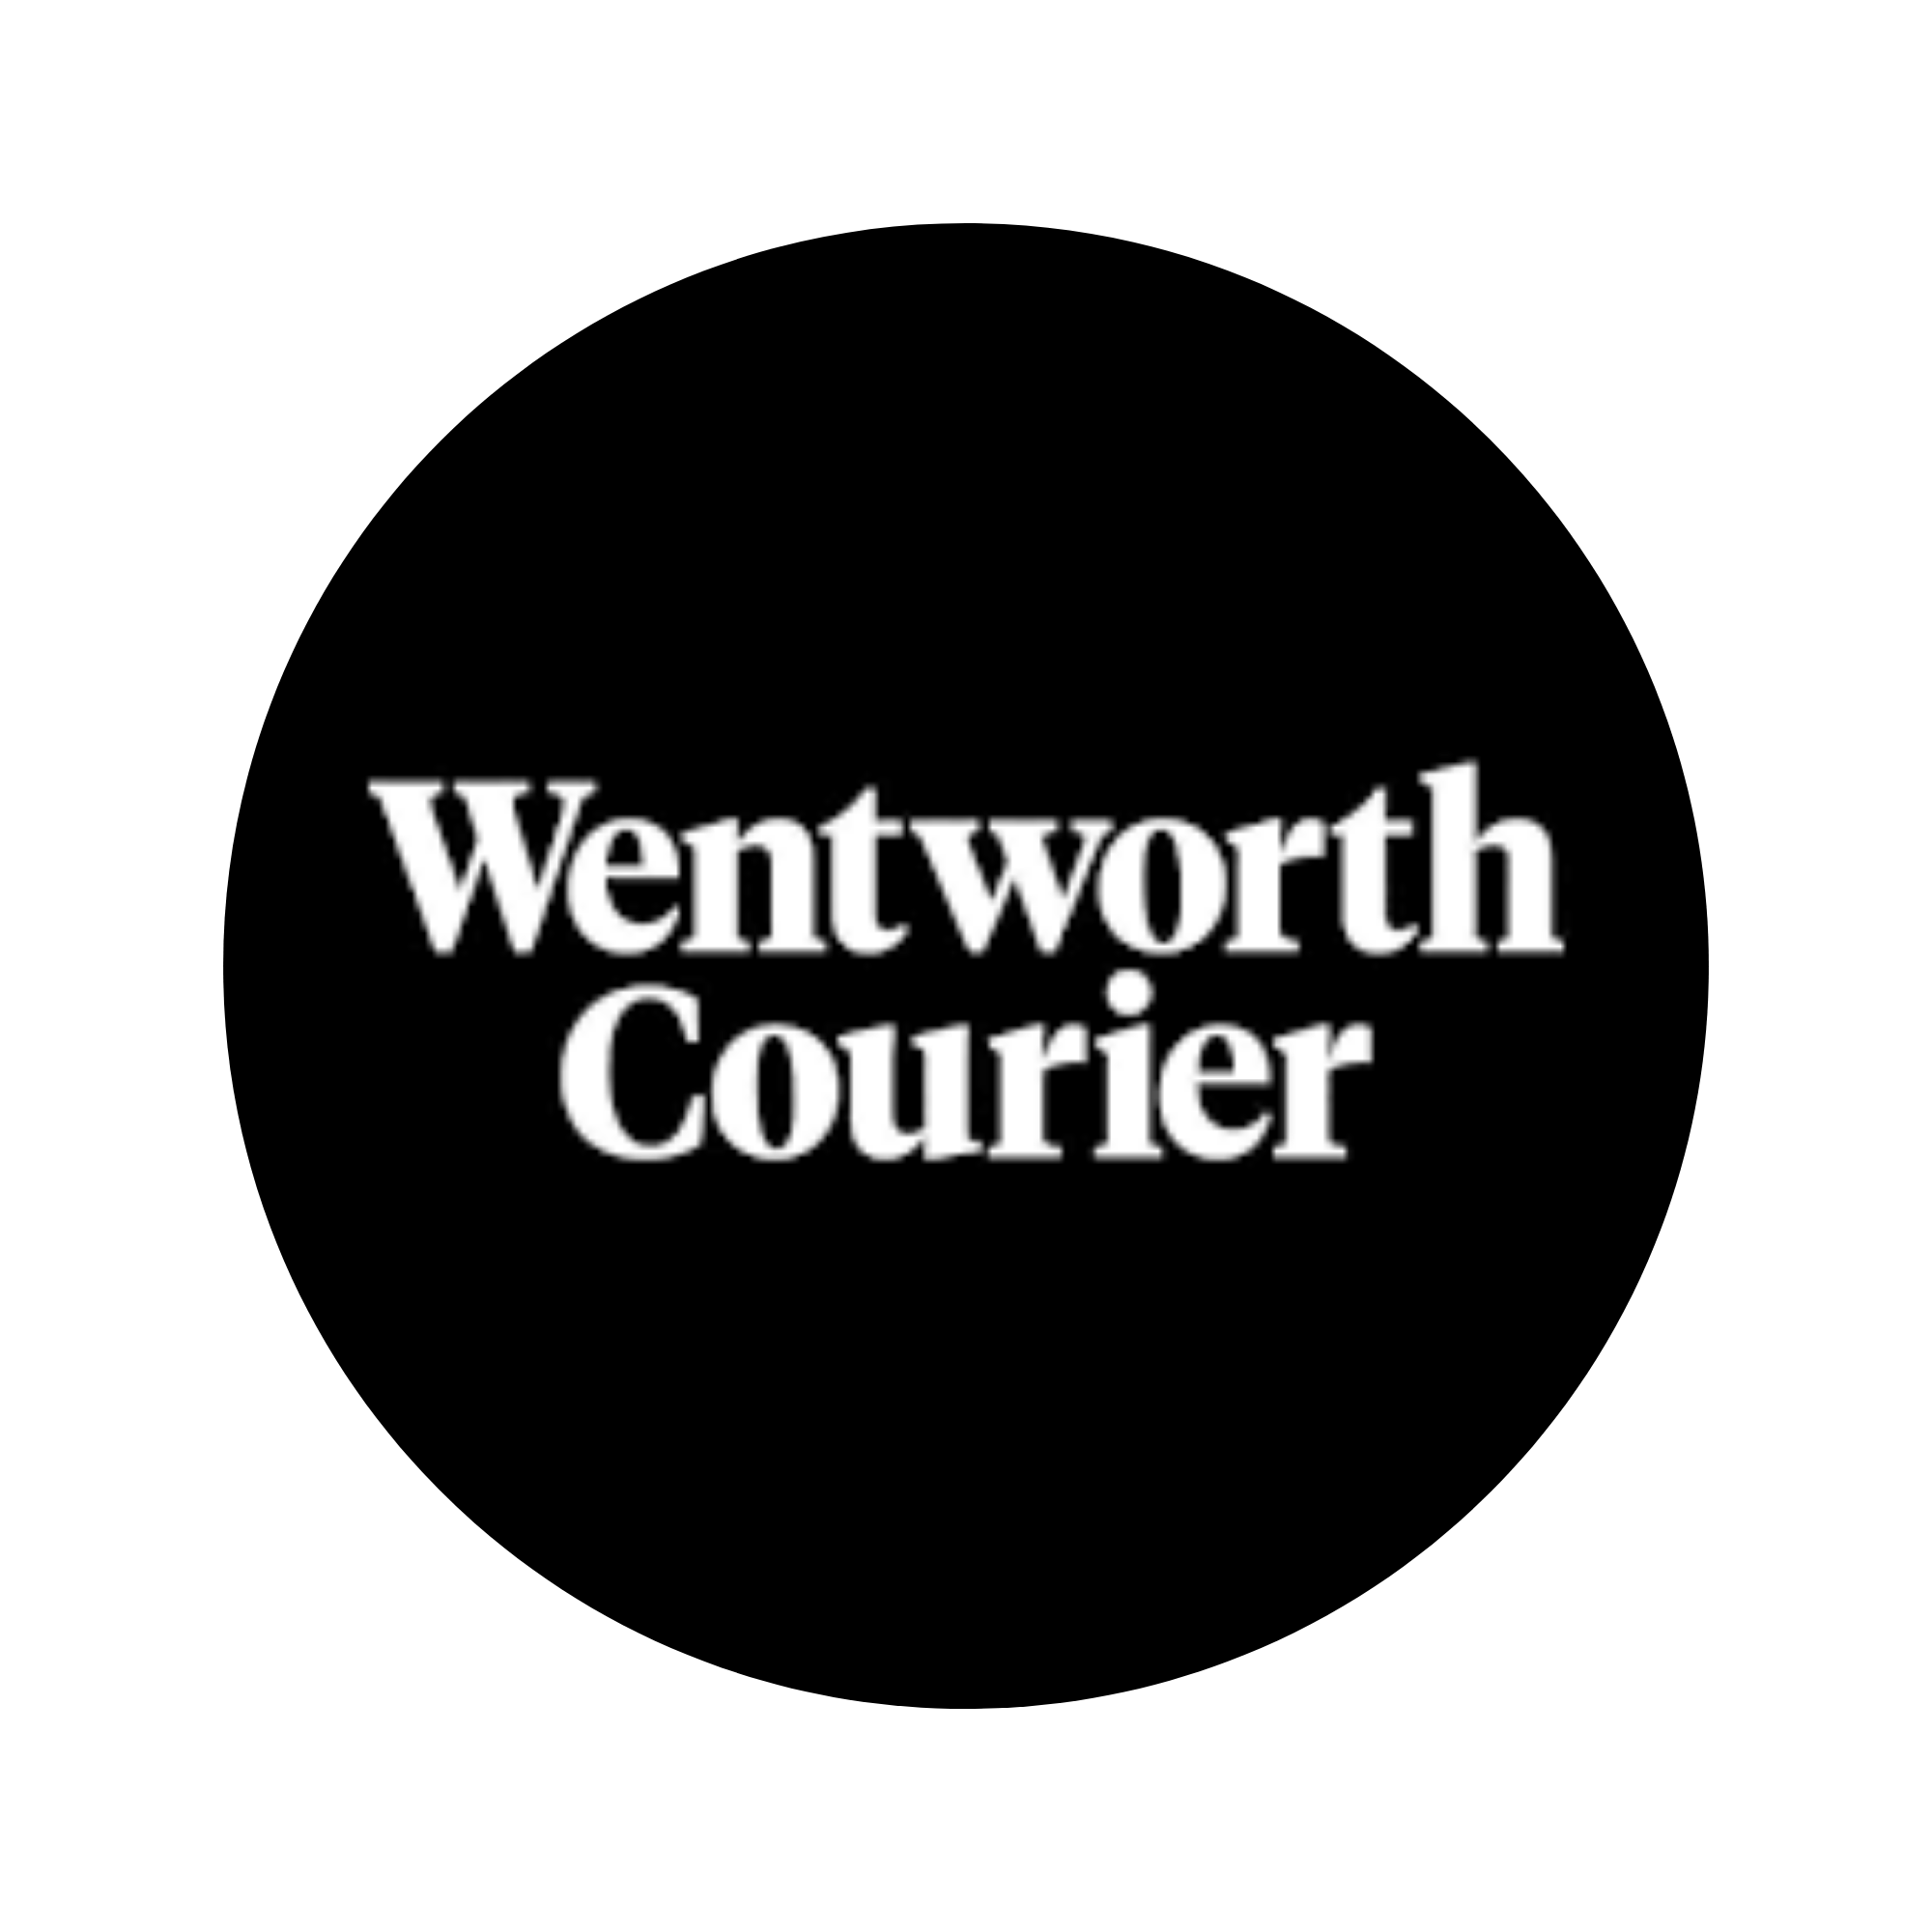 WENTWORTH COURIER.png